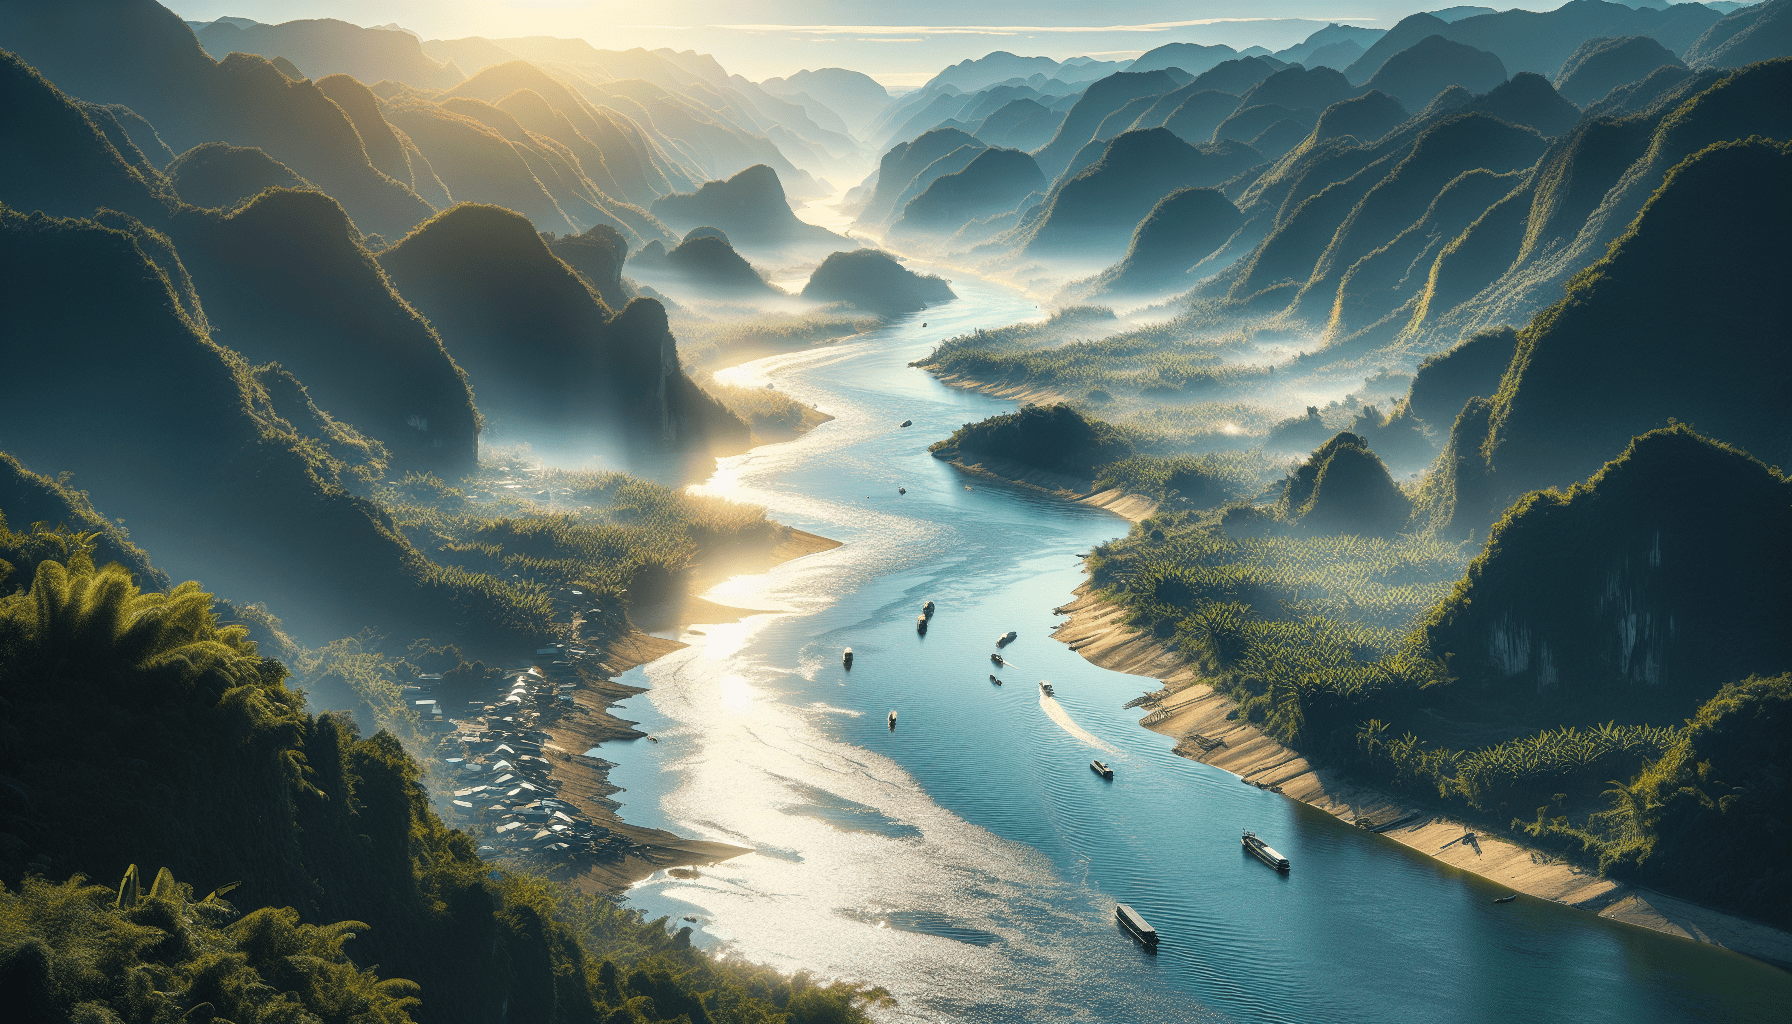 What Is The Longest River In Vietnam?